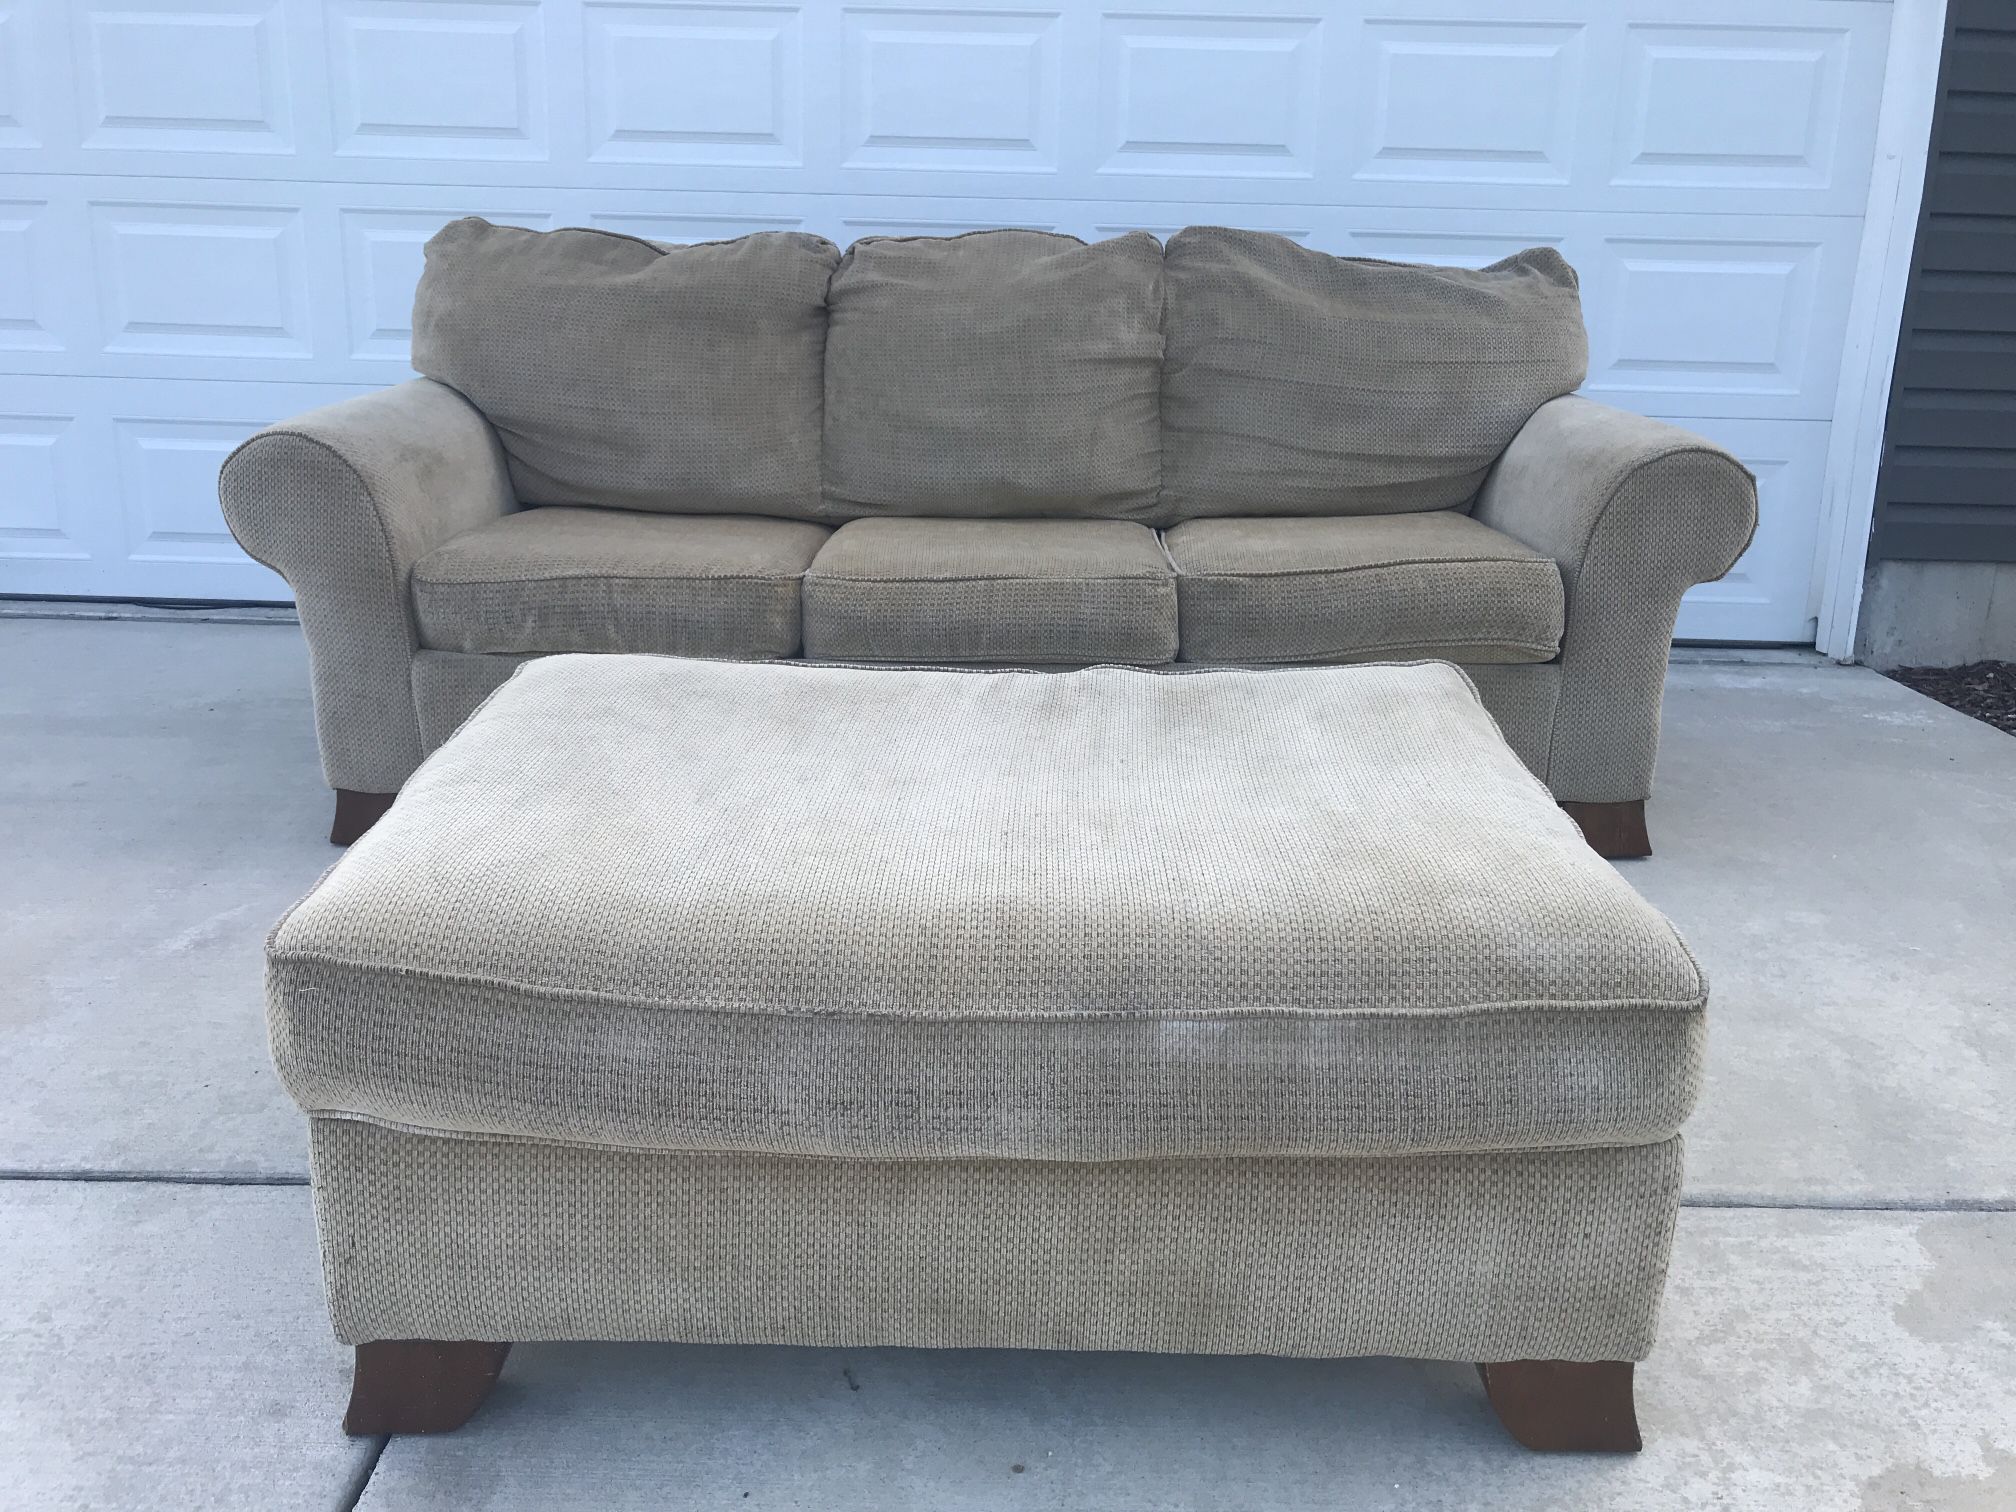 Beige sleeper couch and ottoman set